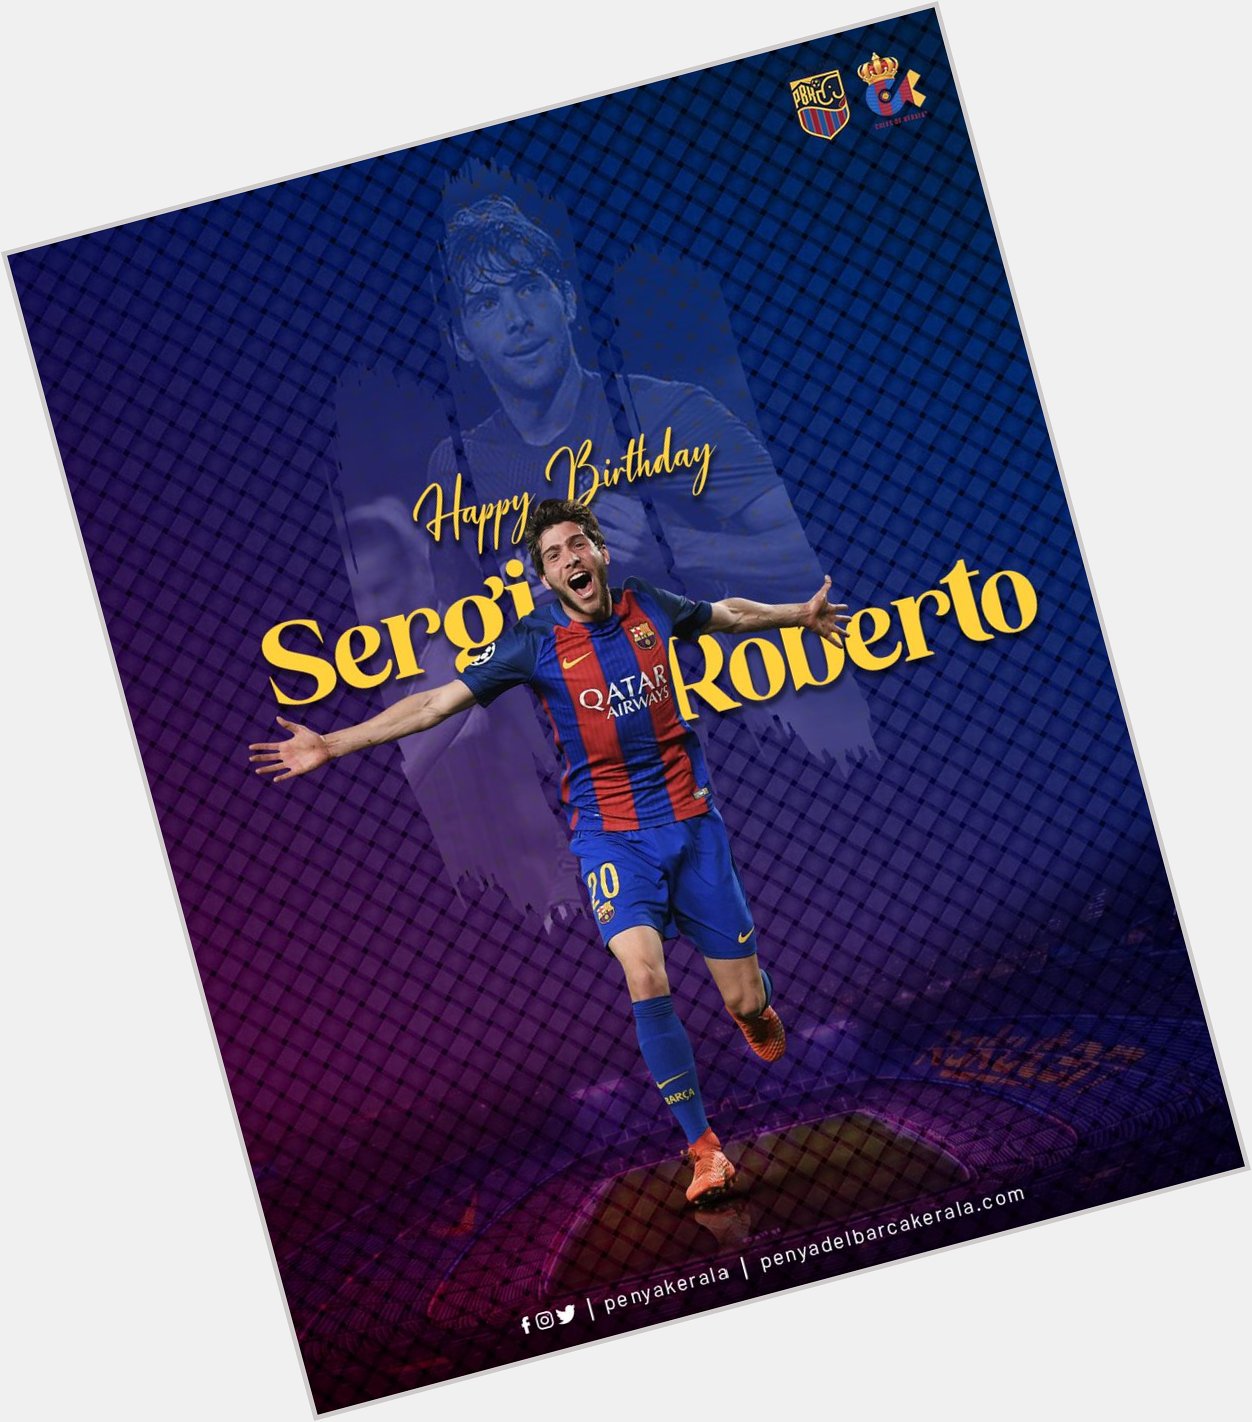 The one who made fairytales possible.

Happy 30th birthday Sergi Roberto   